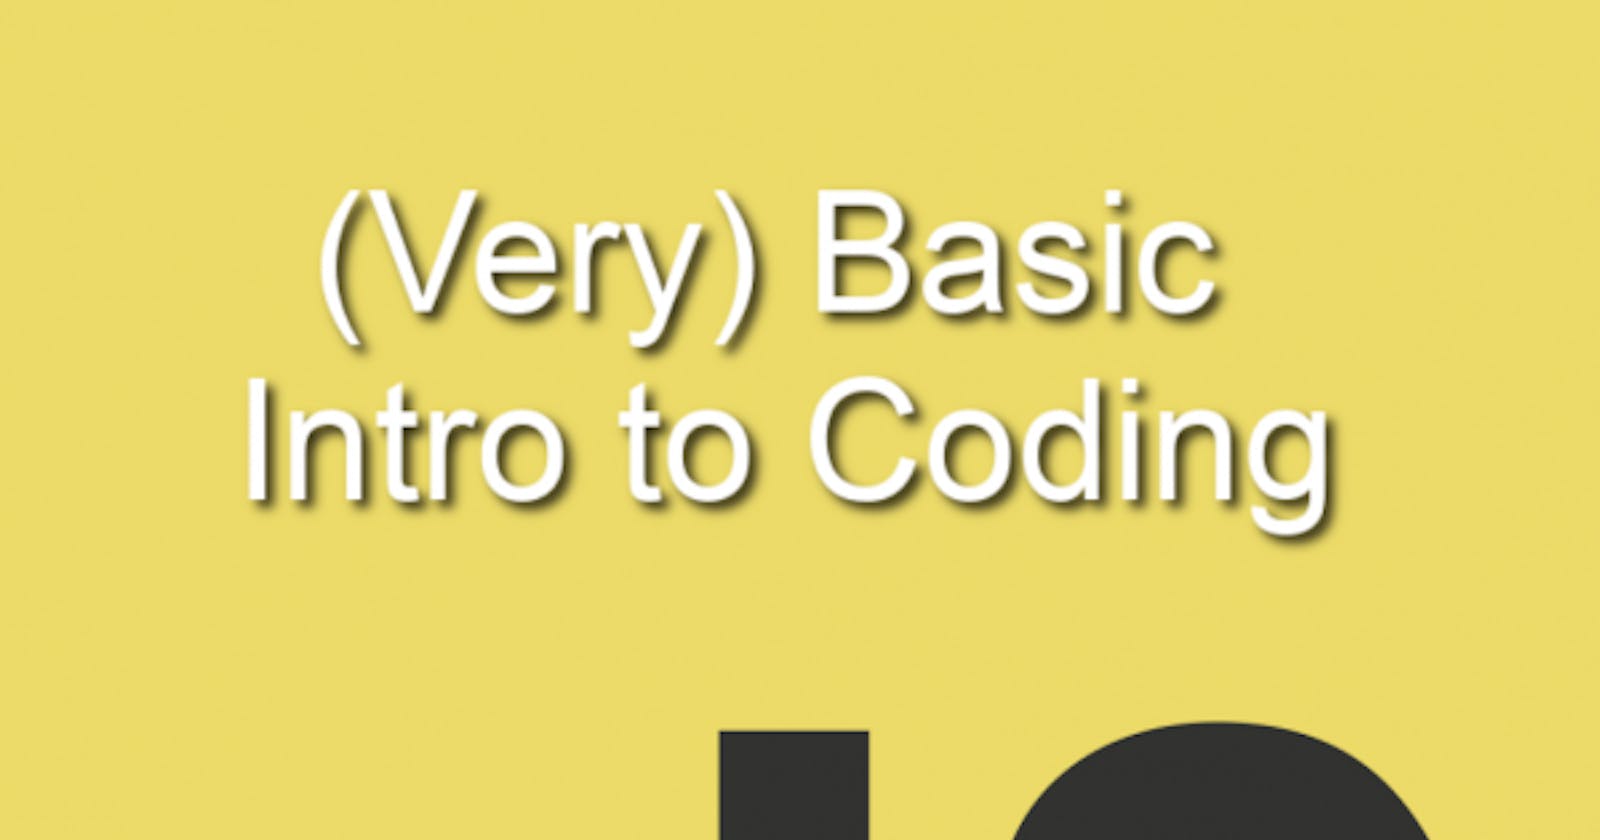 Announcing a “(Very) Basic Intro to Coding”